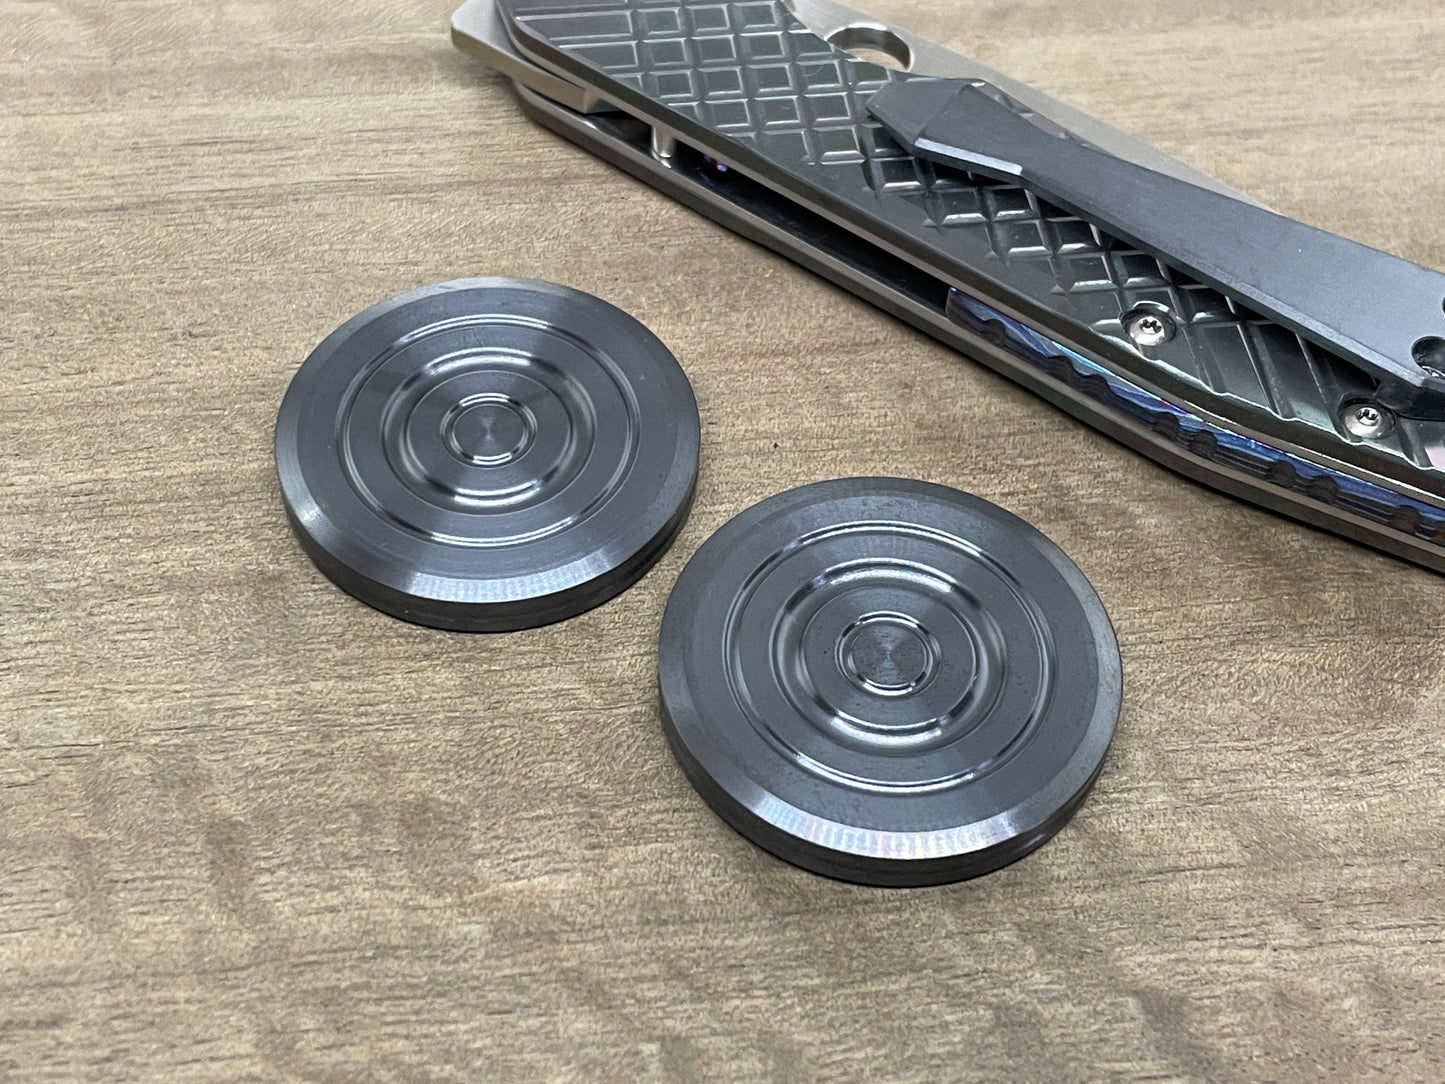 Tungsten GROOVED HAPTIC Coins CLICKY Haptic Slider Adhd Fidget Edc